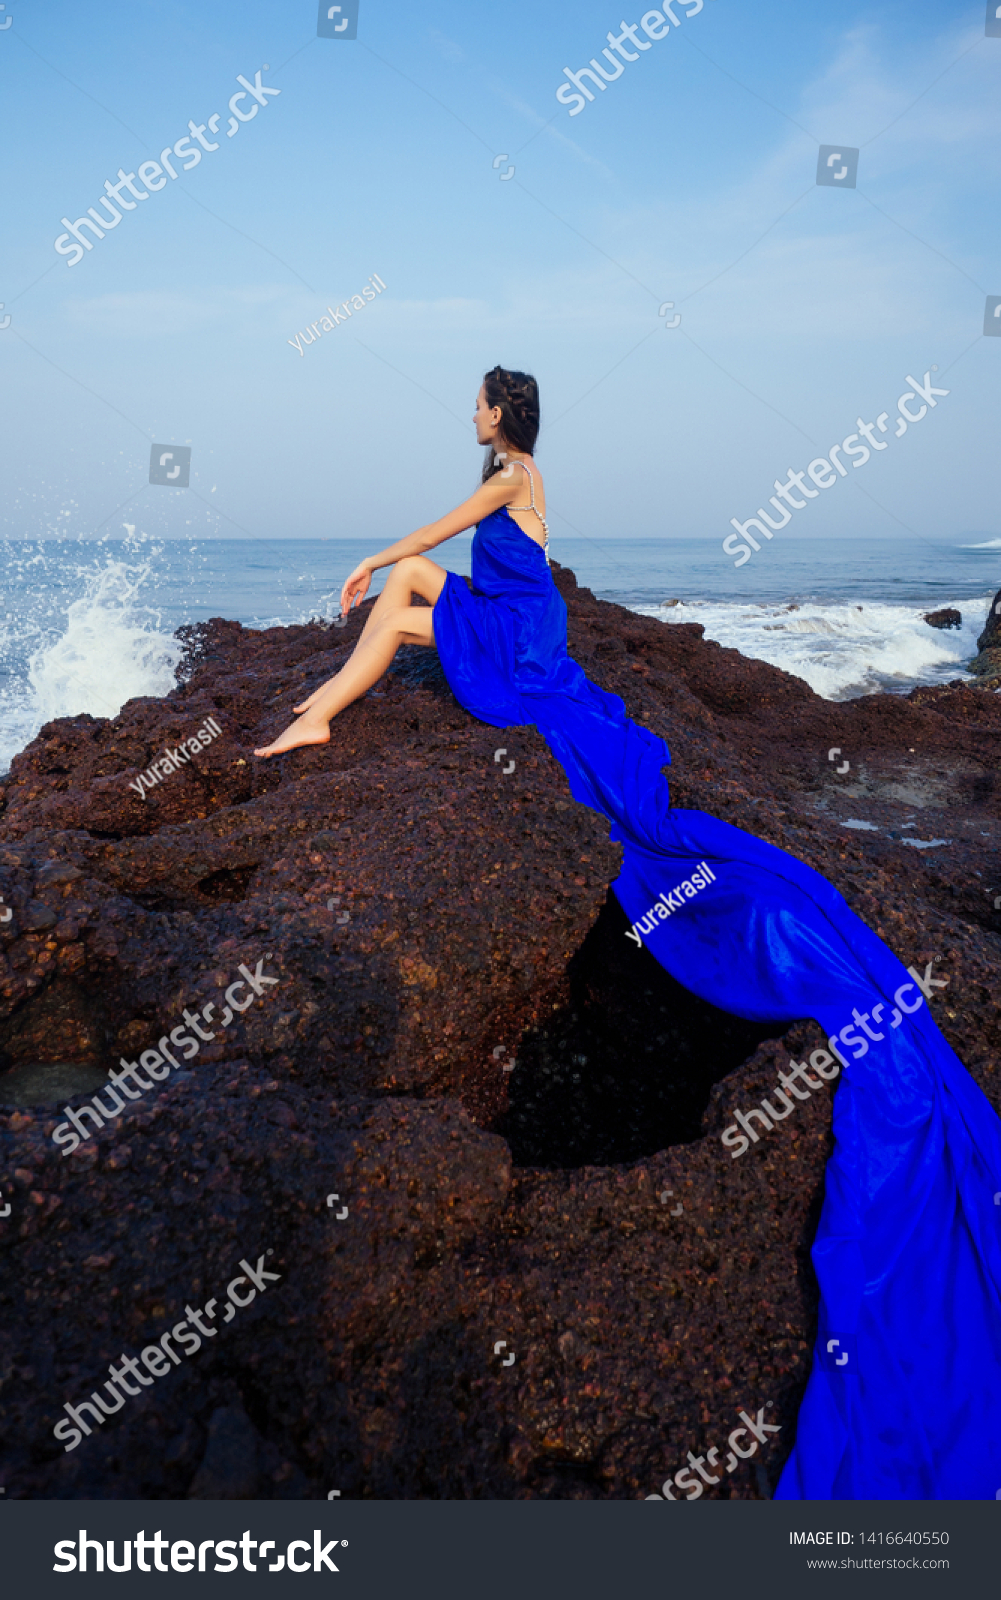 fashion pretty female model posing on a beach with rocks in a long butterfly chameleon dress waterfall of skirt plume train.sensual perfume with a beautiful and young brunette woman wave tropical sand #1416640550